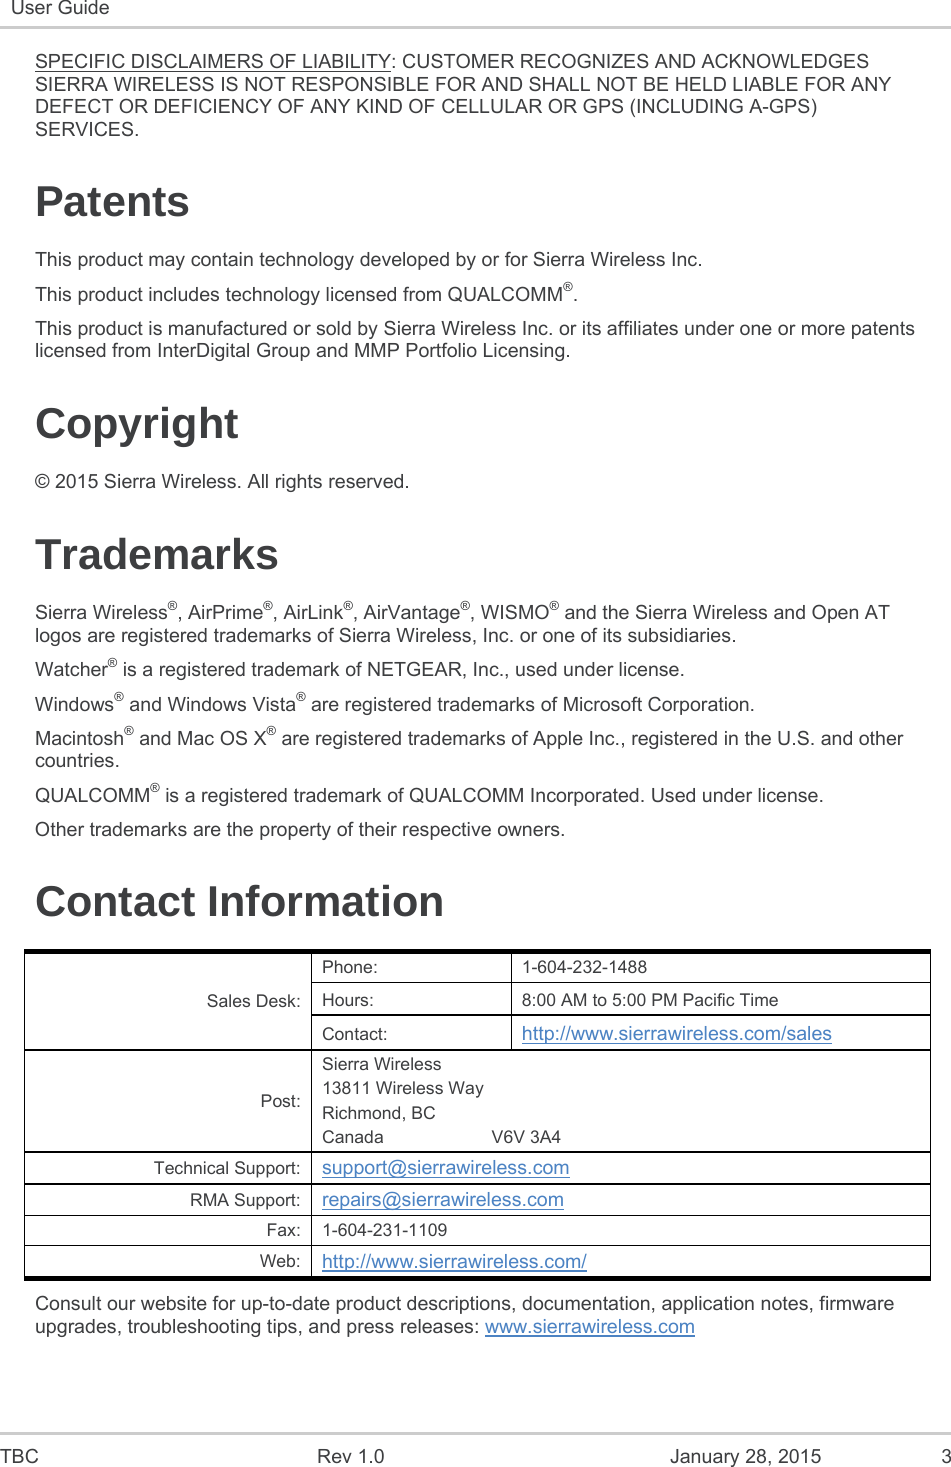  TBC  Rev 1.0  January 28, 2015  3 User Guide   SPECIFIC DISCLAIMERS OF LIABILITY: CUSTOMER RECOGNIZES AND ACKNOWLEDGES SIERRA WIRELESS IS NOT RESPONSIBLE FOR AND SHALL NOT BE HELD LIABLE FOR ANY DEFECT OR DEFICIENCY OF ANY KIND OF CELLULAR OR GPS (INCLUDING A-GPS) SERVICES. Patents This product may contain technology developed by or for Sierra Wireless Inc. This product includes technology licensed from QUALCOMM®. This product is manufactured or sold by Sierra Wireless Inc. or its affiliates under one or more patents licensed from InterDigital Group and MMP Portfolio Licensing. Copyright © 2015 Sierra Wireless. All rights reserved. Trademarks Sierra Wireless®, AirPrime®, AirLink®, AirVantage®, WISMO® and the Sierra Wireless and Open AT logos are registered trademarks of Sierra Wireless, Inc. or one of its subsidiaries. Watcher® is a registered trademark of NETGEAR, Inc., used under license. Windows® and Windows Vista® are registered trademarks of Microsoft Corporation. Macintosh® and Mac OS X® are registered trademarks of Apple Inc., registered in the U.S. and other countries. QUALCOMM® is a registered trademark of QUALCOMM Incorporated. Used under license. Other trademarks are the property of their respective owners. Contact Information Sales Desk: Phone: 1-604-232-1488 Hours:  8:00 AM to 5:00 PM Pacific Time Contact:  http://www.sierrawireless.com/sales Post: Sierra Wireless 13811 Wireless Way Richmond, BC Canada                      V6V 3A4 Technical Support:  support@sierrawireless.com RMA Support:  repairs@sierrawireless.com Fax: 1-604-231-1109 Web:  http://www.sierrawireless.com/ Consult our website for up-to-date product descriptions, documentation, application notes, firmware upgrades, troubleshooting tips, and press releases: www.sierrawireless.com 